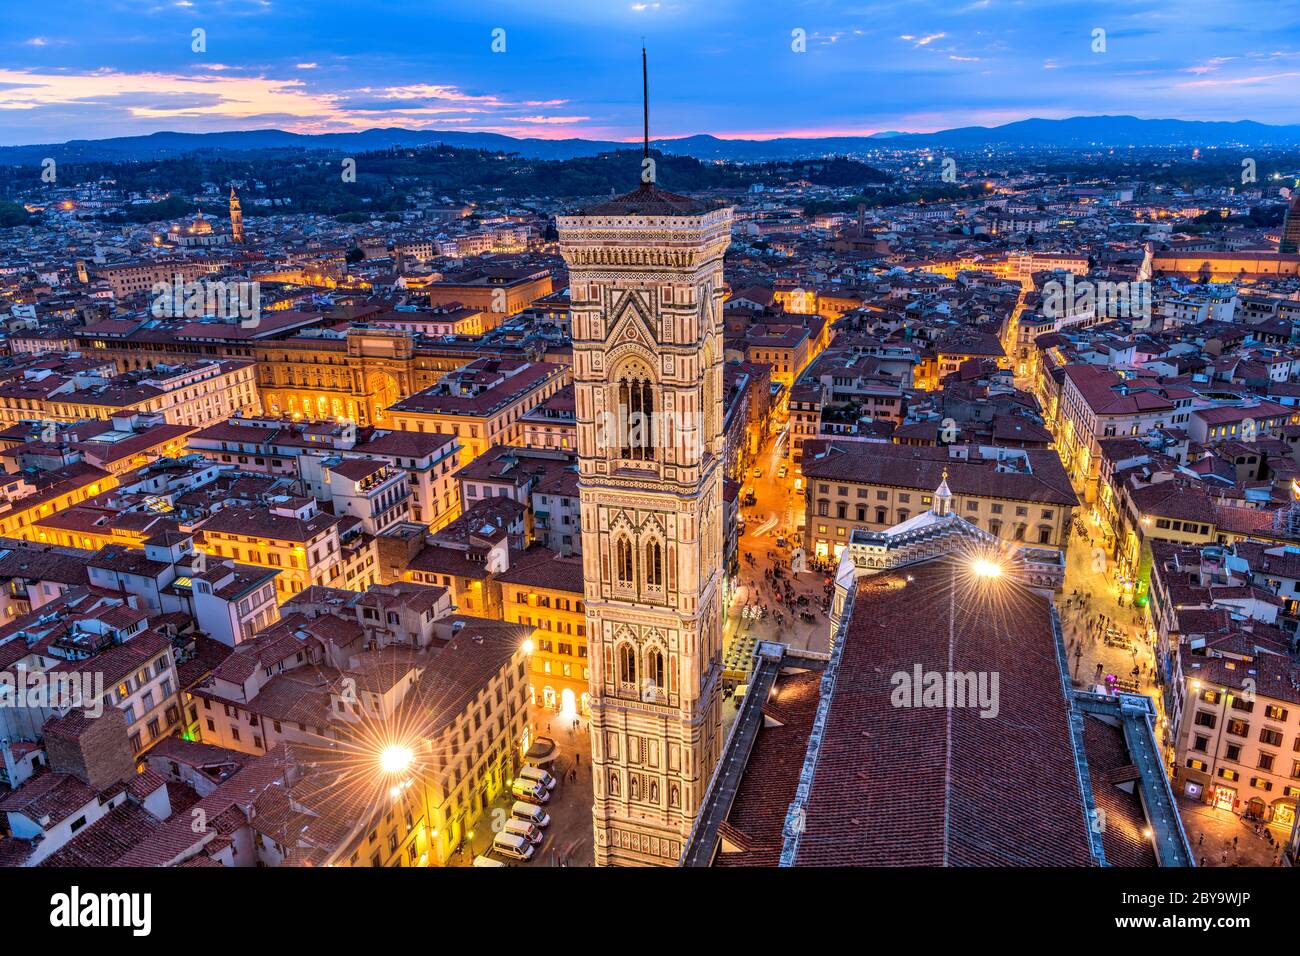 Giotto's Campanile - Aerial dusk view of Giotto's Campanile and Old Town of Florence, as seen from top of Brunelleschi's Dome of Florence Cathedral. Stock Photo